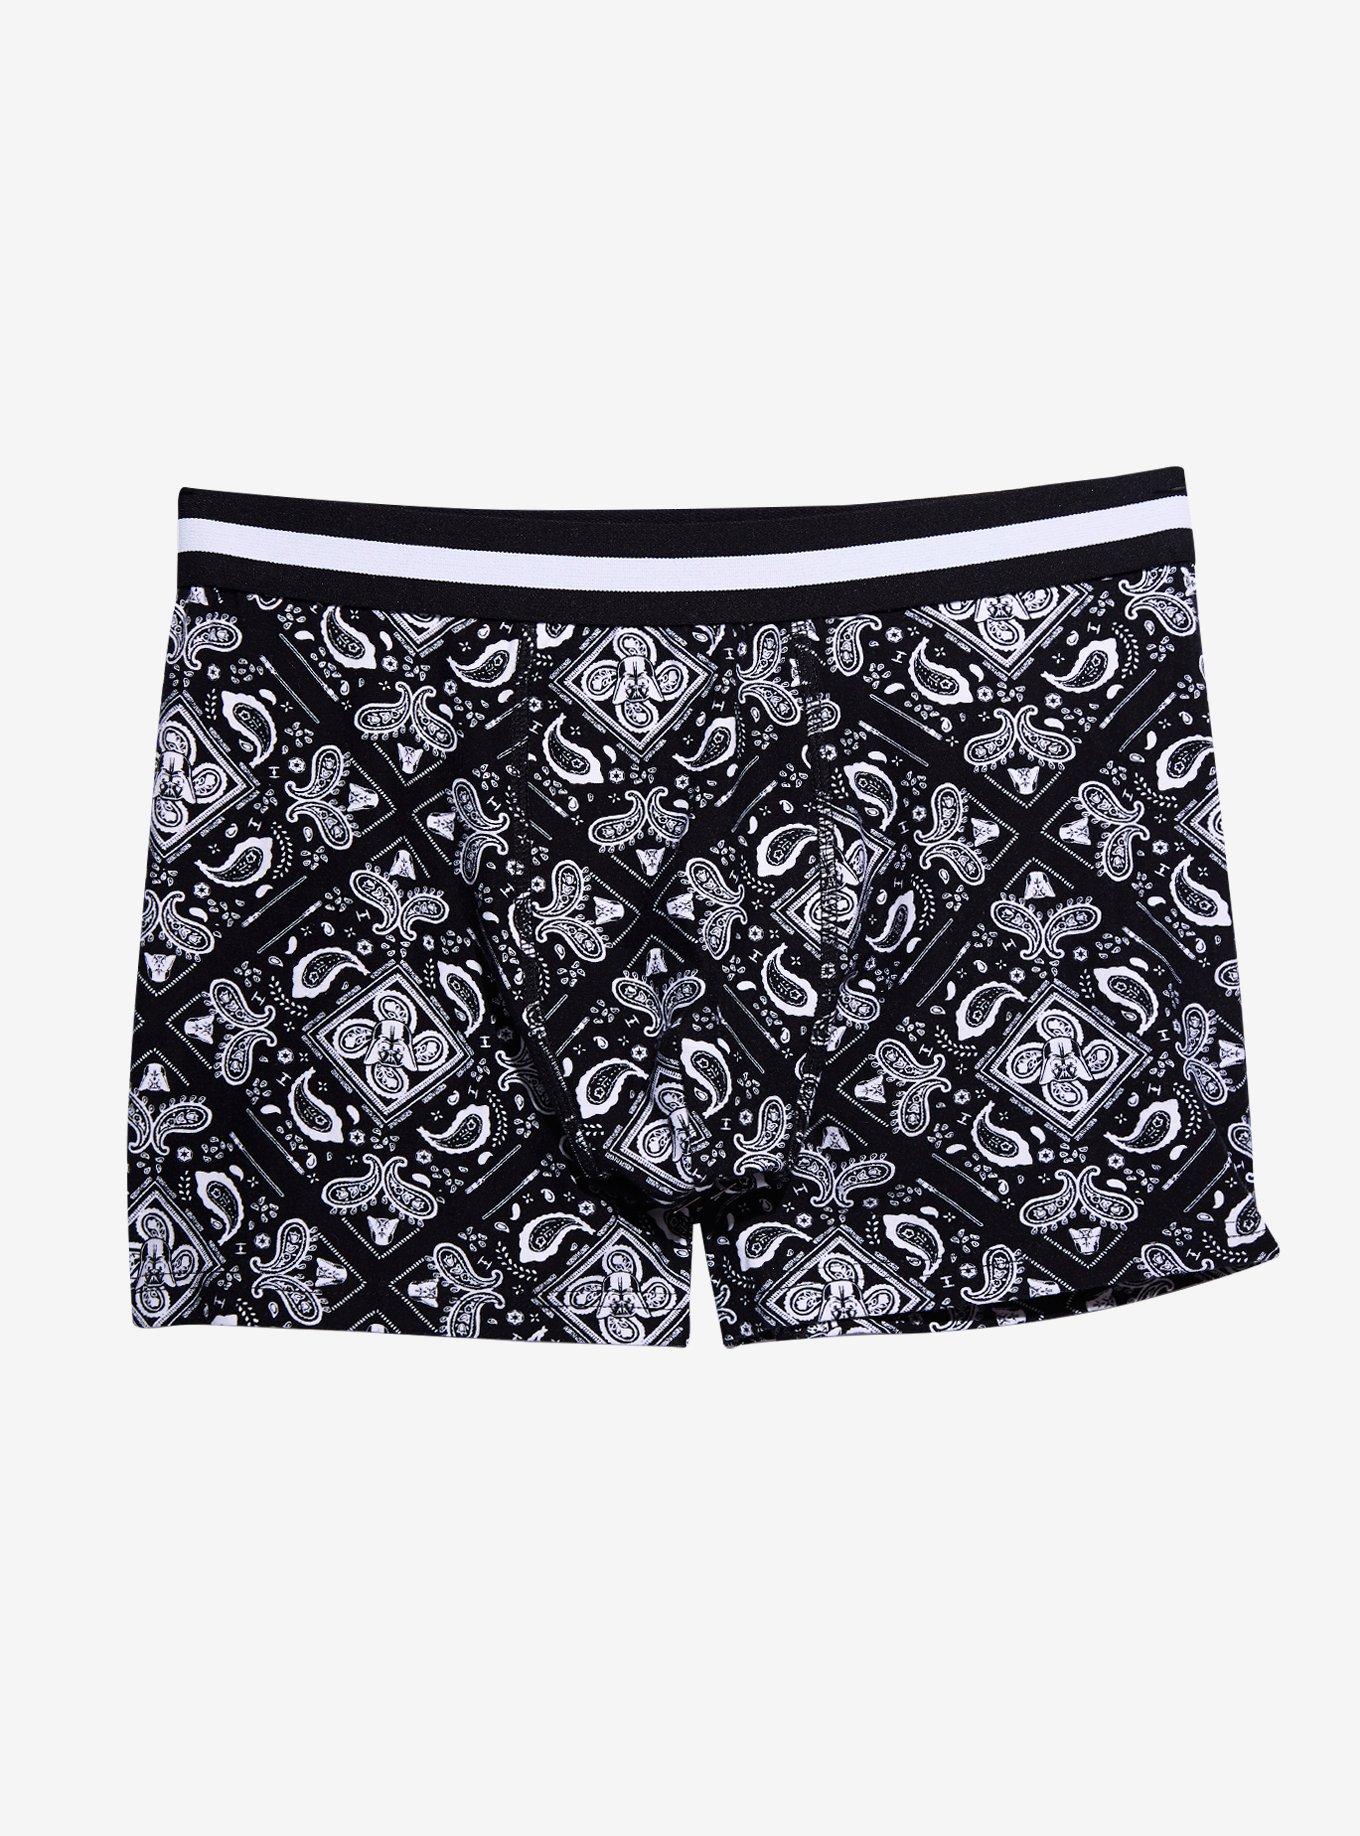 Star Wars Paisley Print Boxer Briefs - BoxLunch Exclusive | BoxLunch